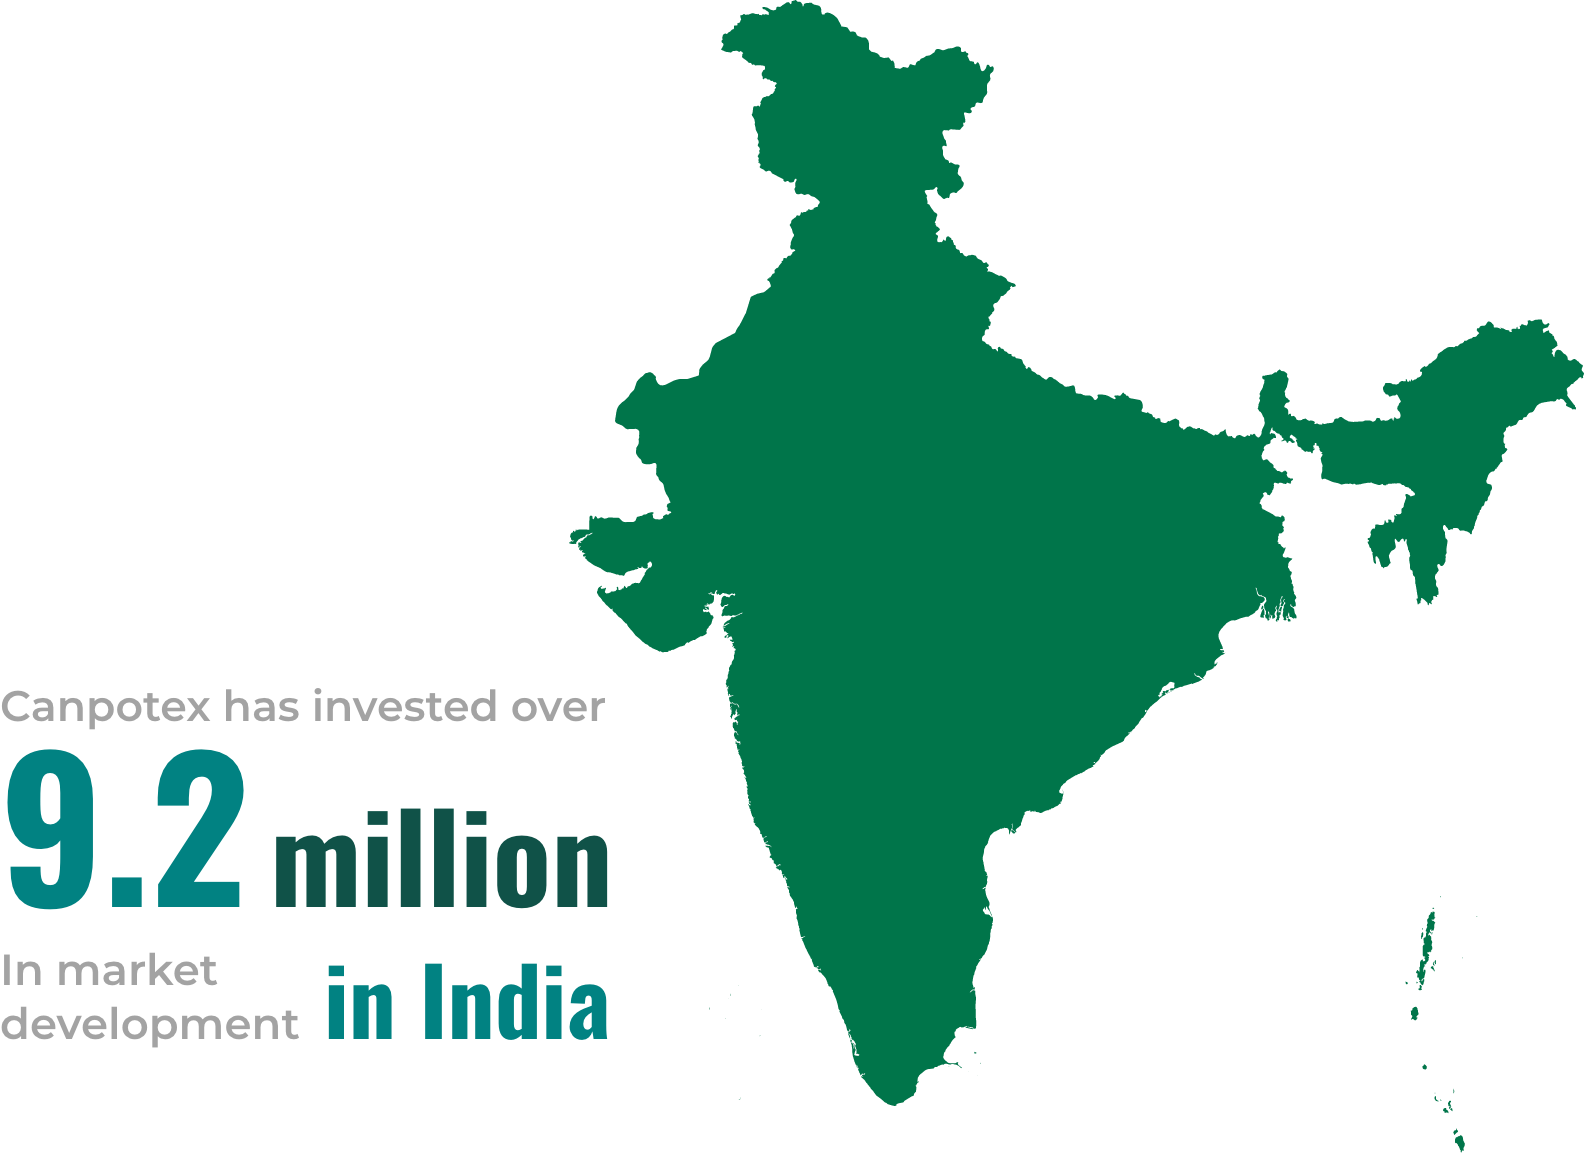 Canpotex has invested over 9.2 million in market development in India